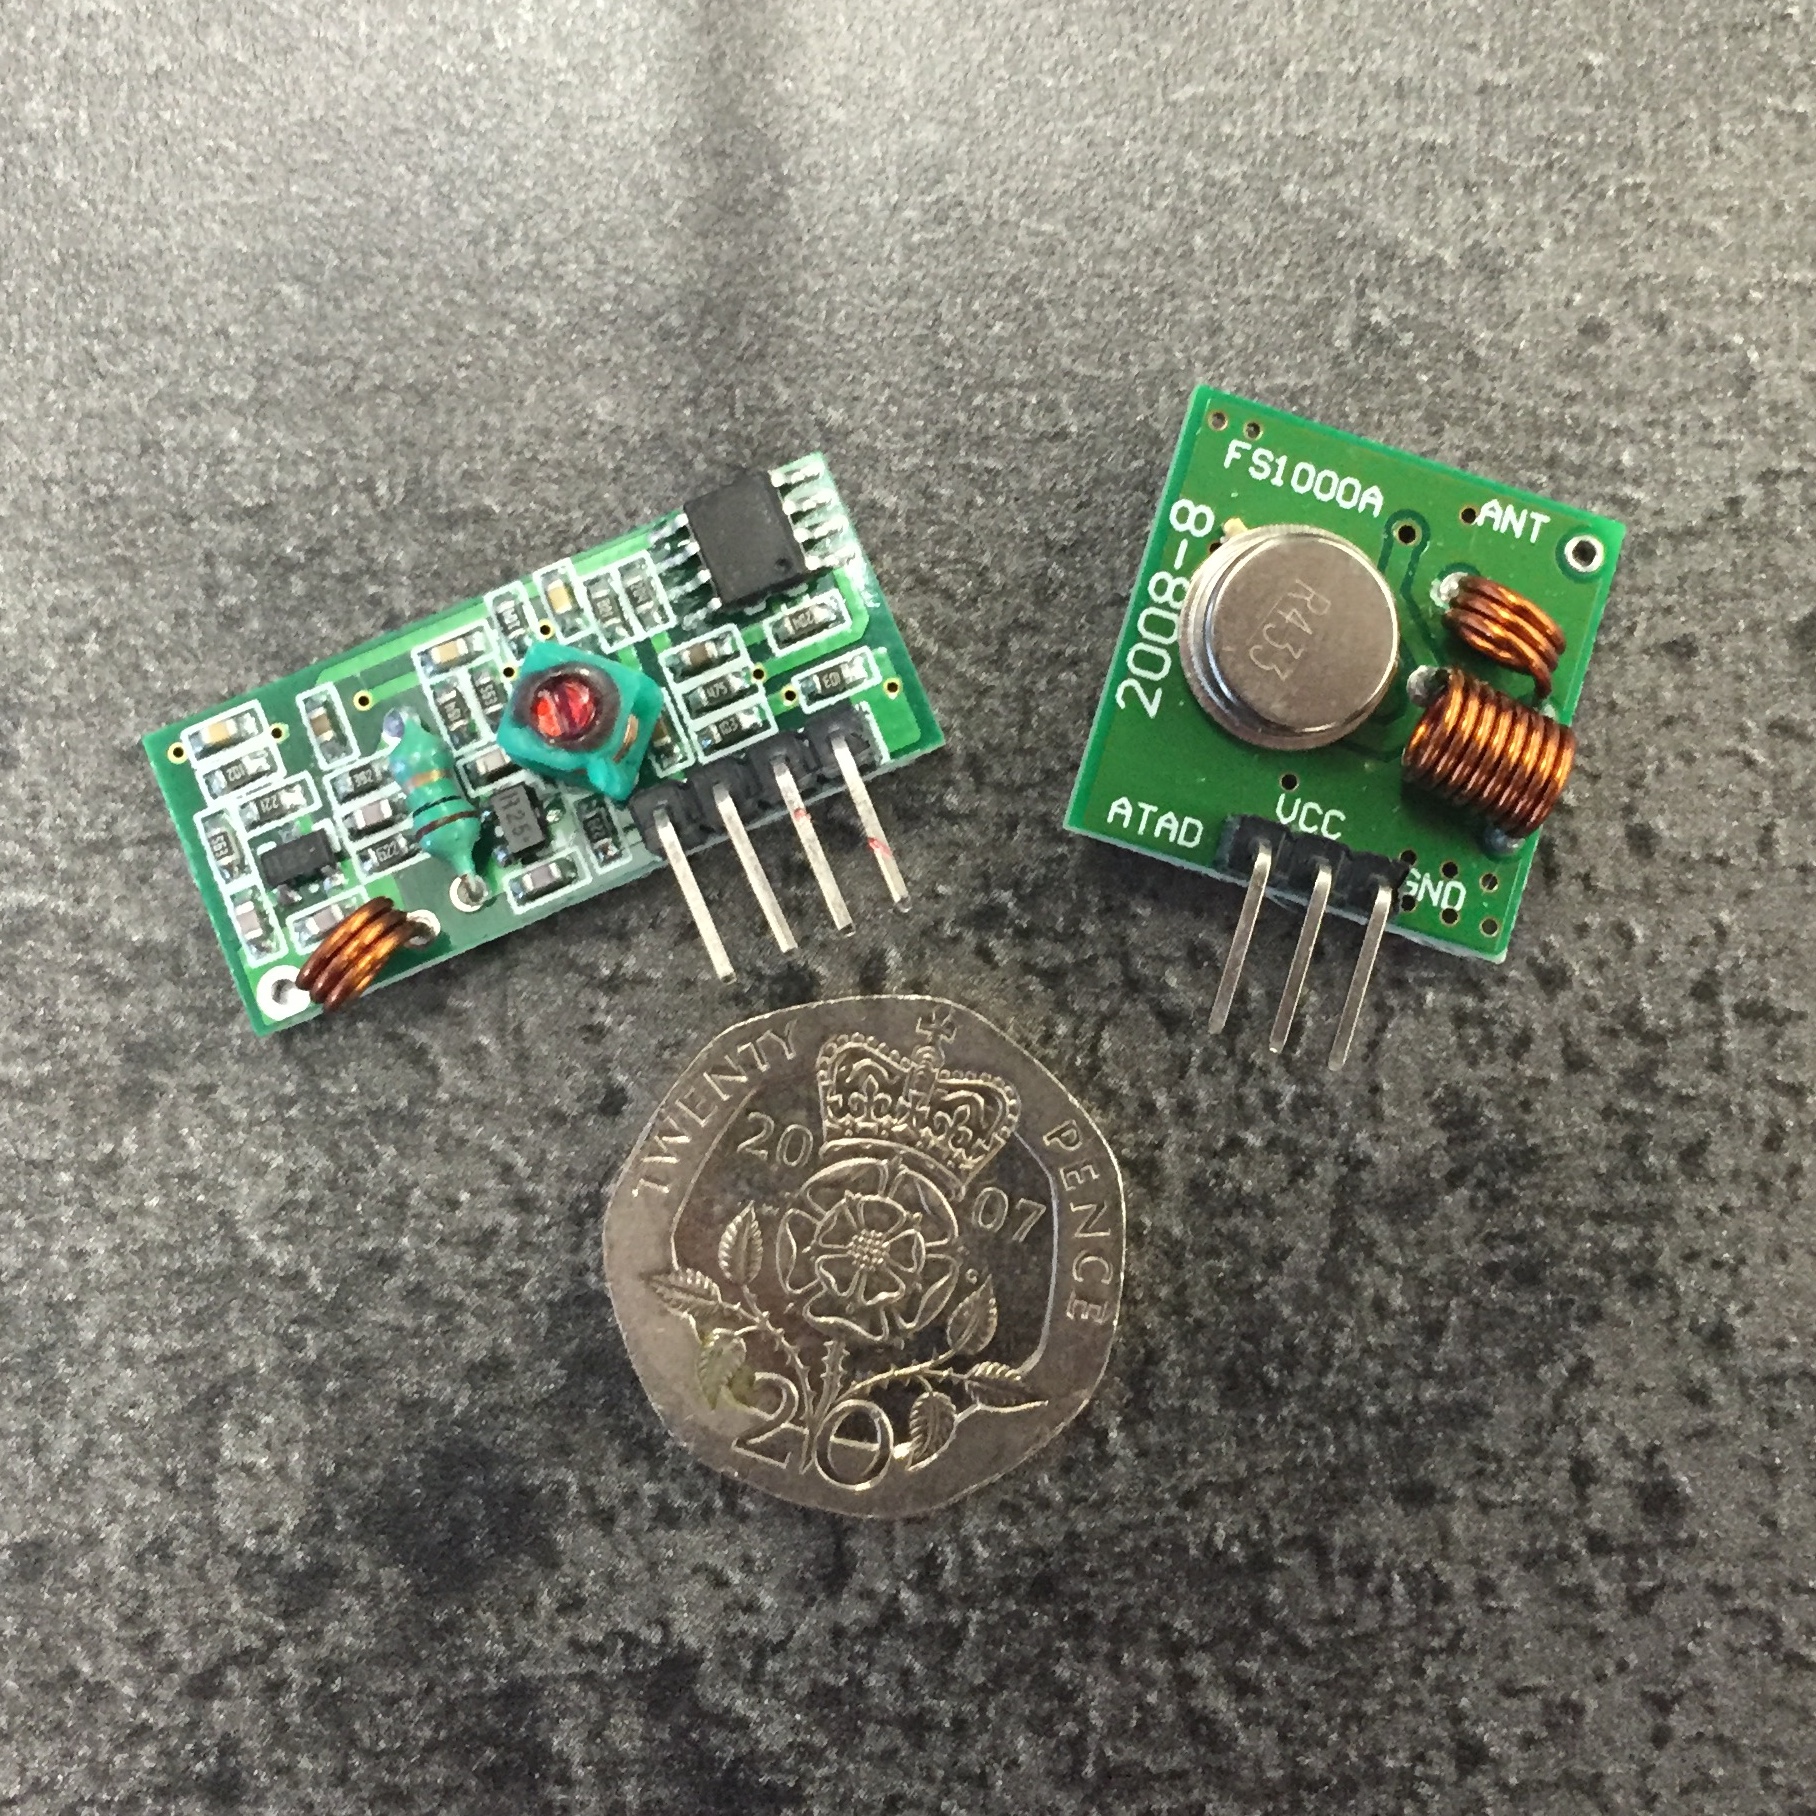 433MHz transmitter and receiver